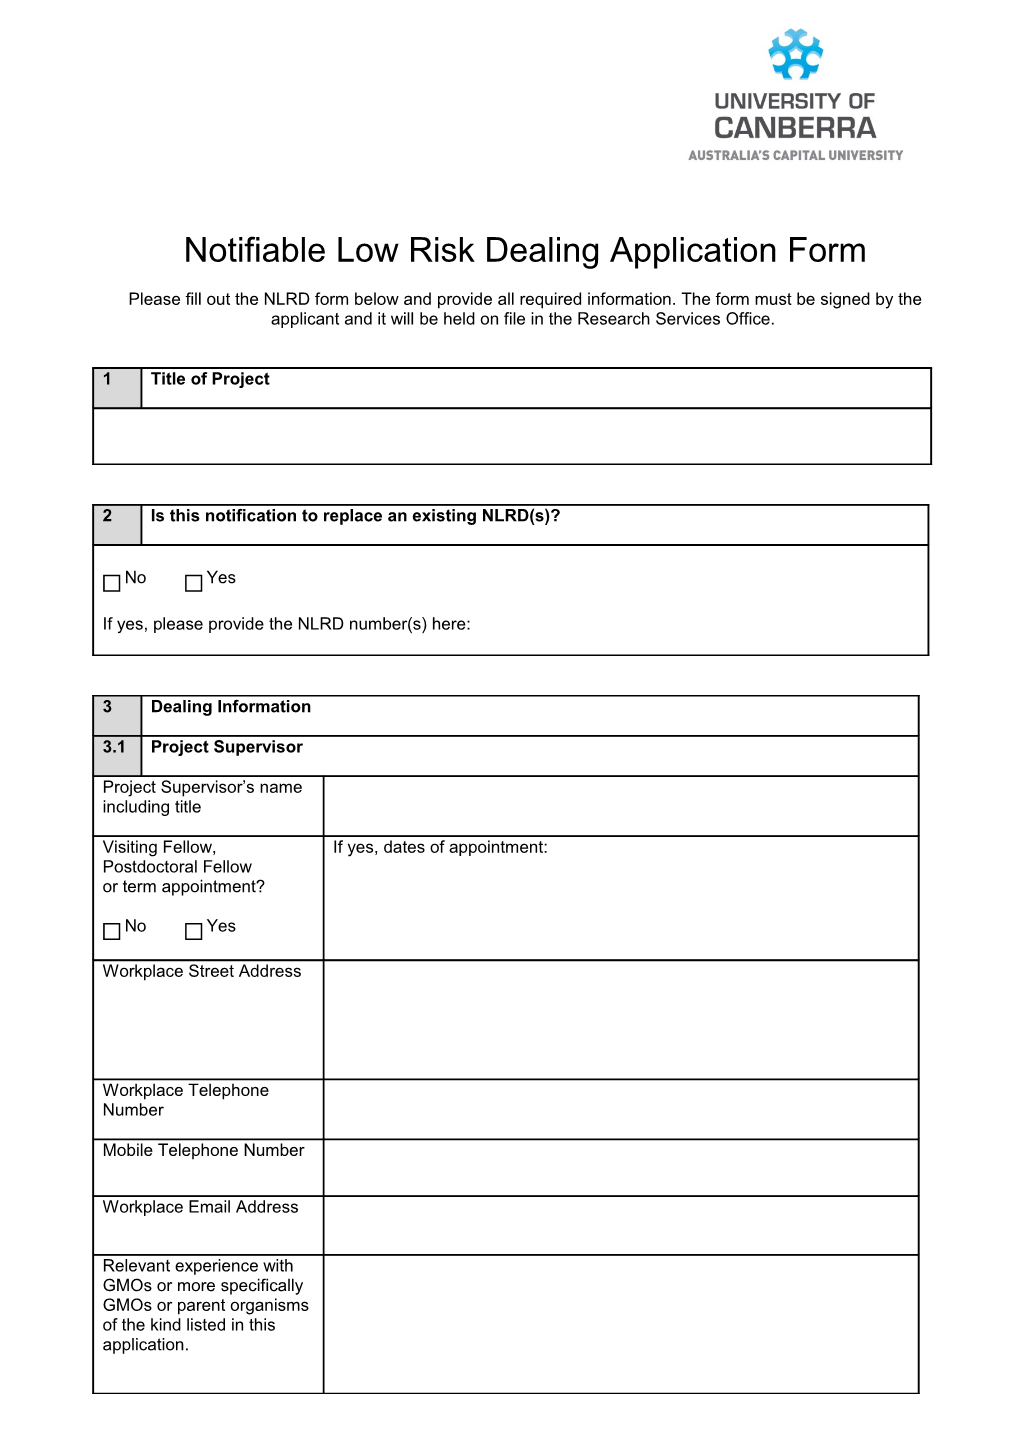 Submitting Your Form